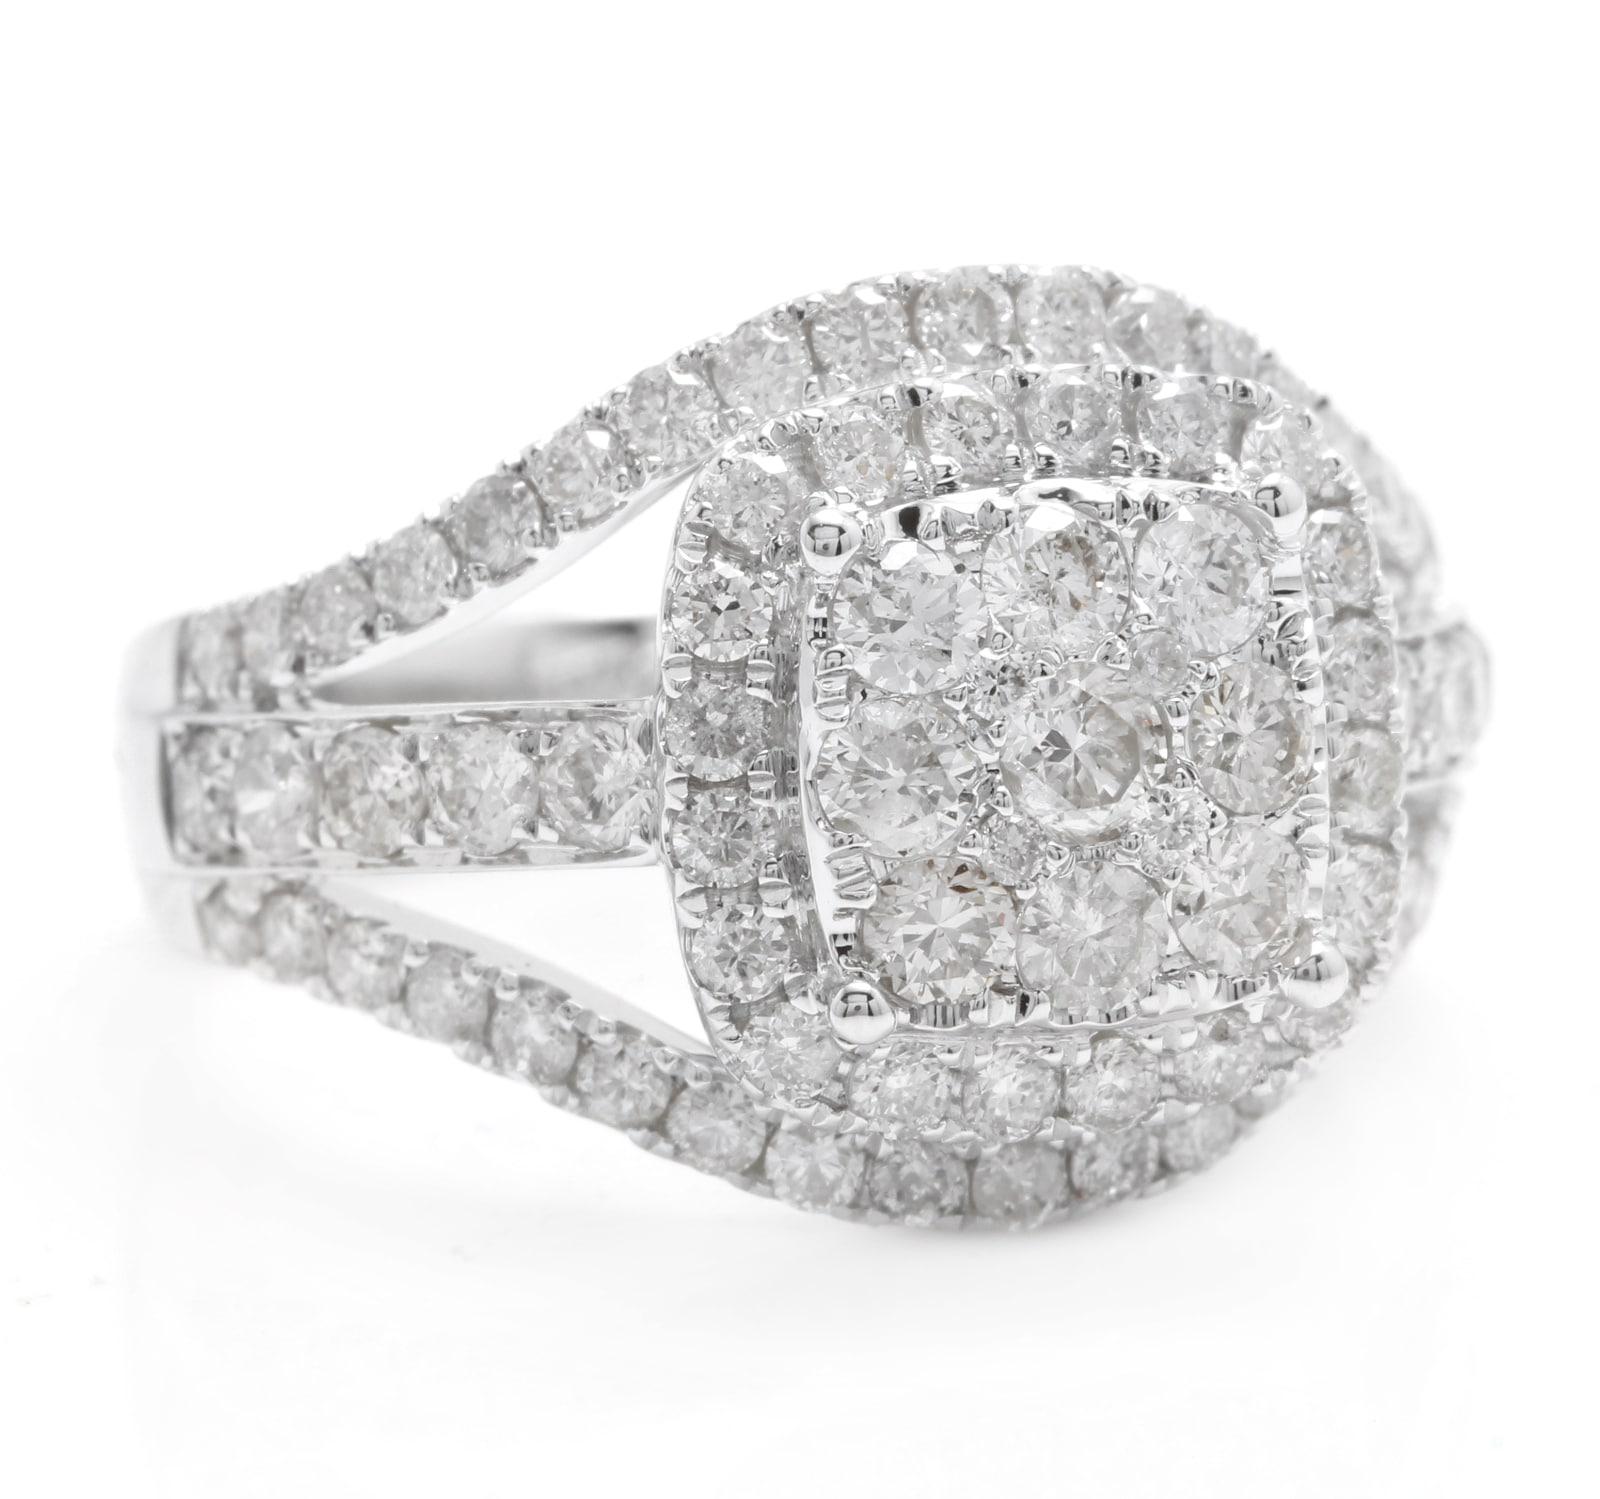 Splendid 1.50 Carats Natural Diamond 14K Solid White Gold Ring

Suggested Replacement Value: $4,800.00

Stamped: G585 (14k)

Total Natural Round Diamonds Weight: 1.50 Carats (color H-J / Clarity SI1-SI3)

The width of the ring is: 14.00mm

Ring